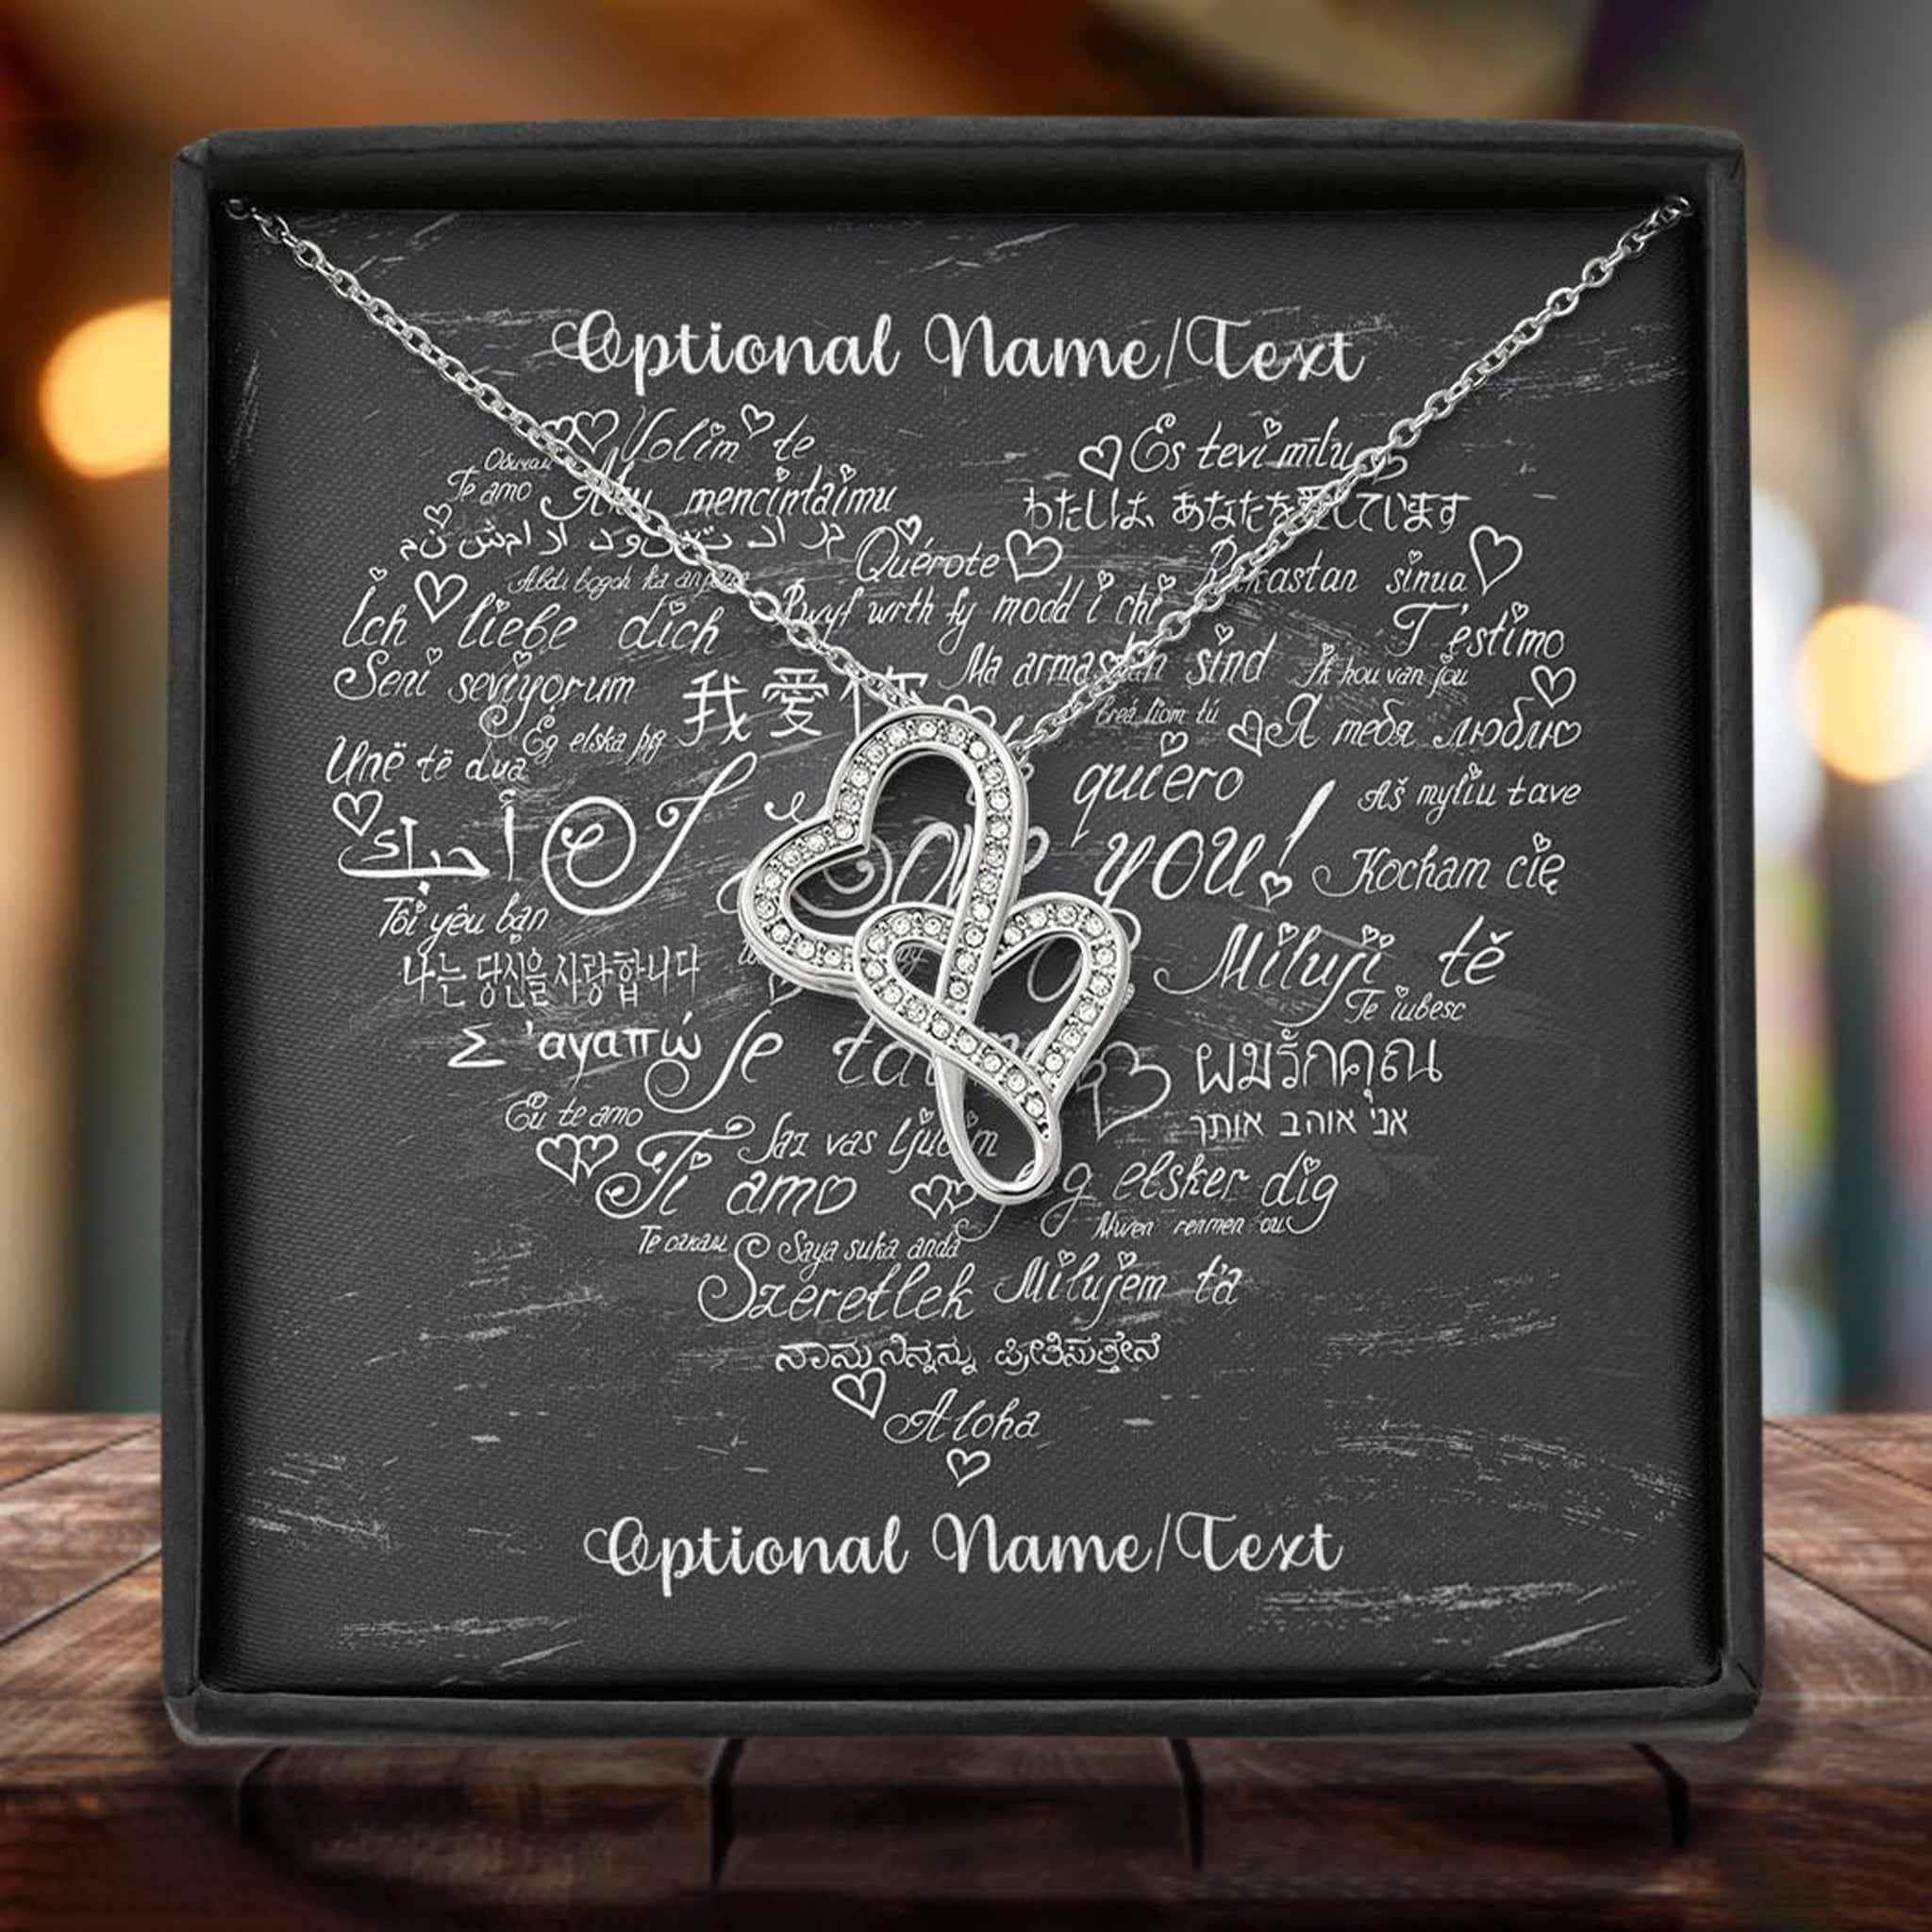 Double Intertwined Hearts Necklace With I Love You In Multiple Languages Personalized Insert CardCustomly Gifts